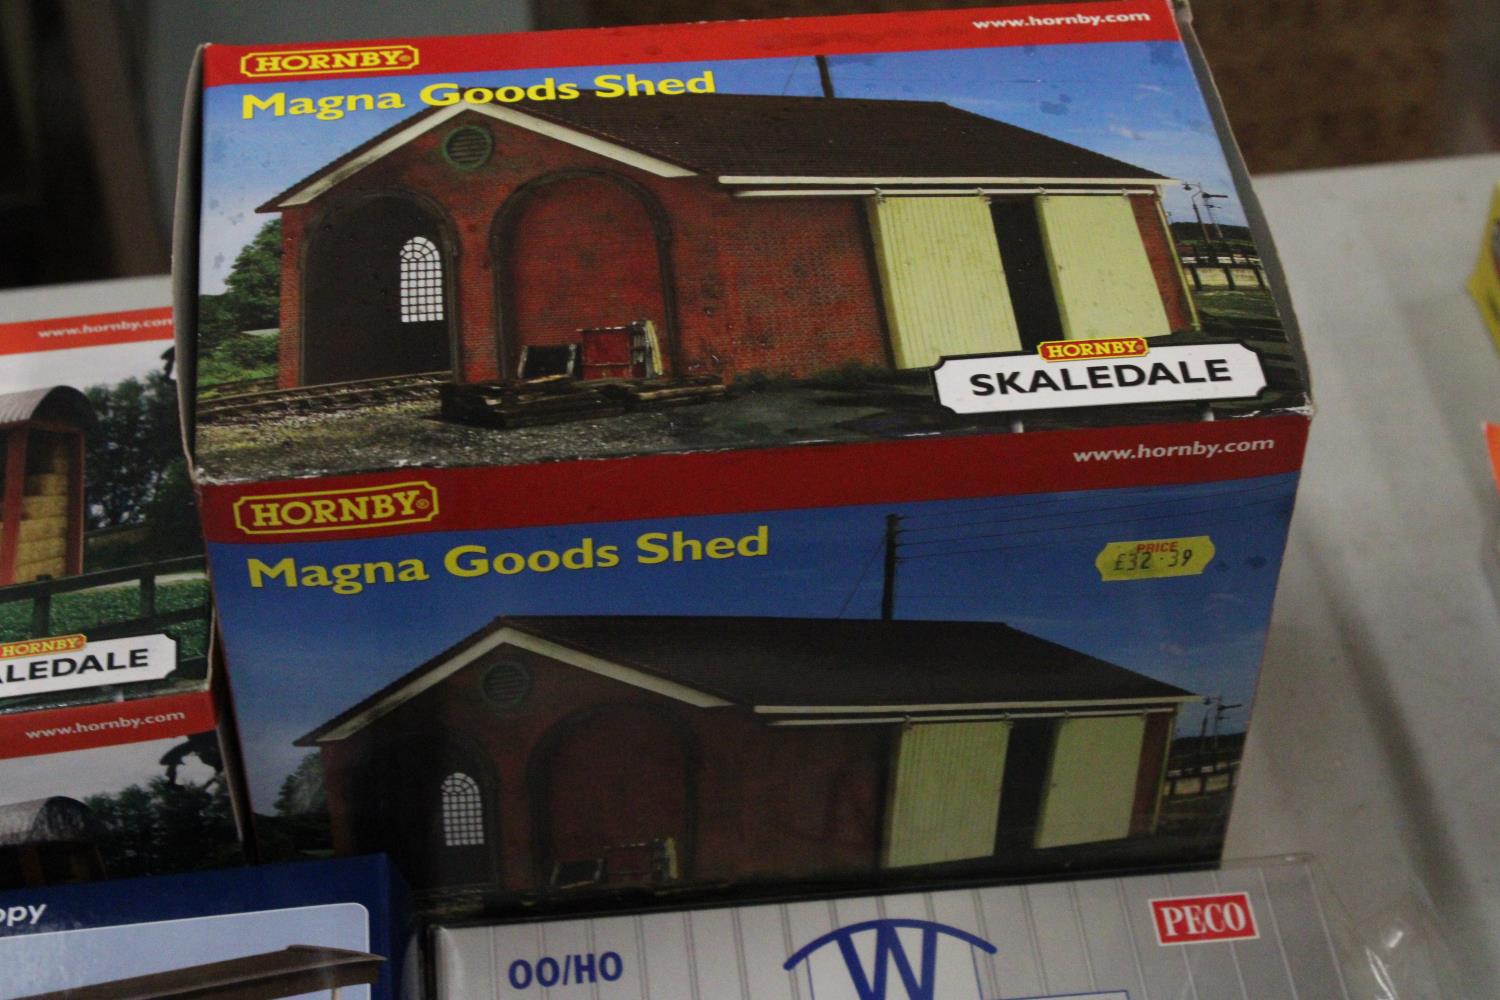 SEVEN BOXED MODEL KITS FOR TRAIN SET LANDSCAPING TO INCLUDE TWO HORNBY EXAMPLES - Image 2 of 5